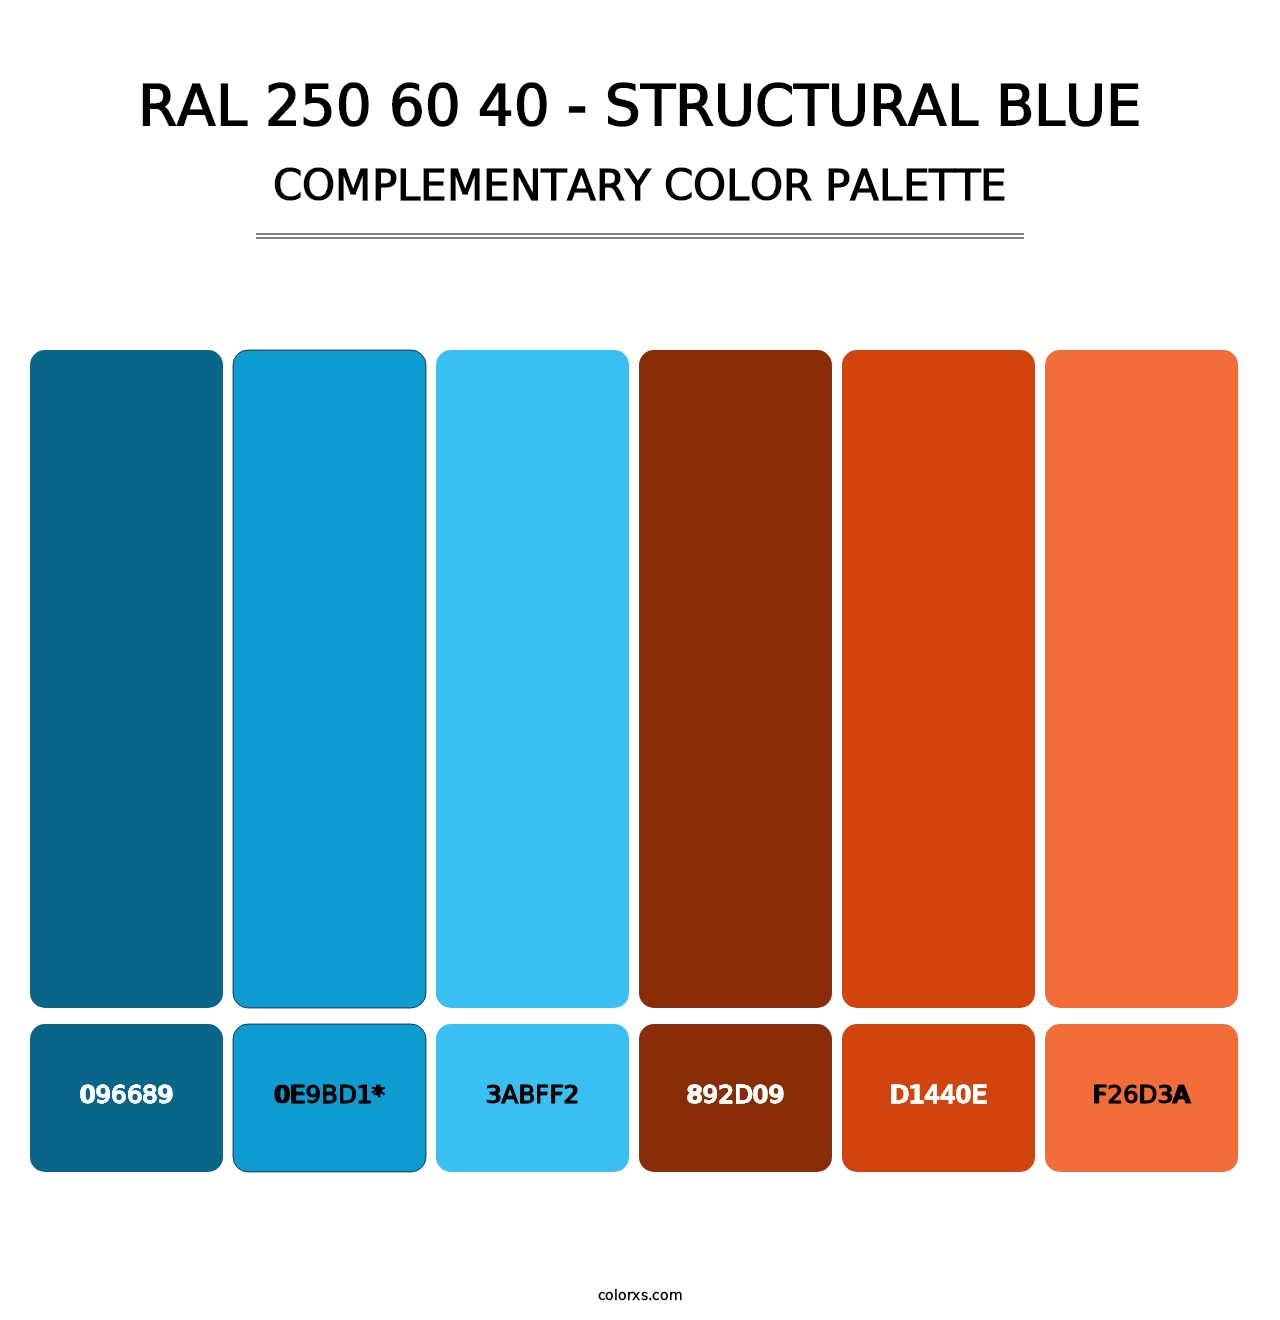 RAL 250 60 40 - Structural Blue - Complementary Color Palette